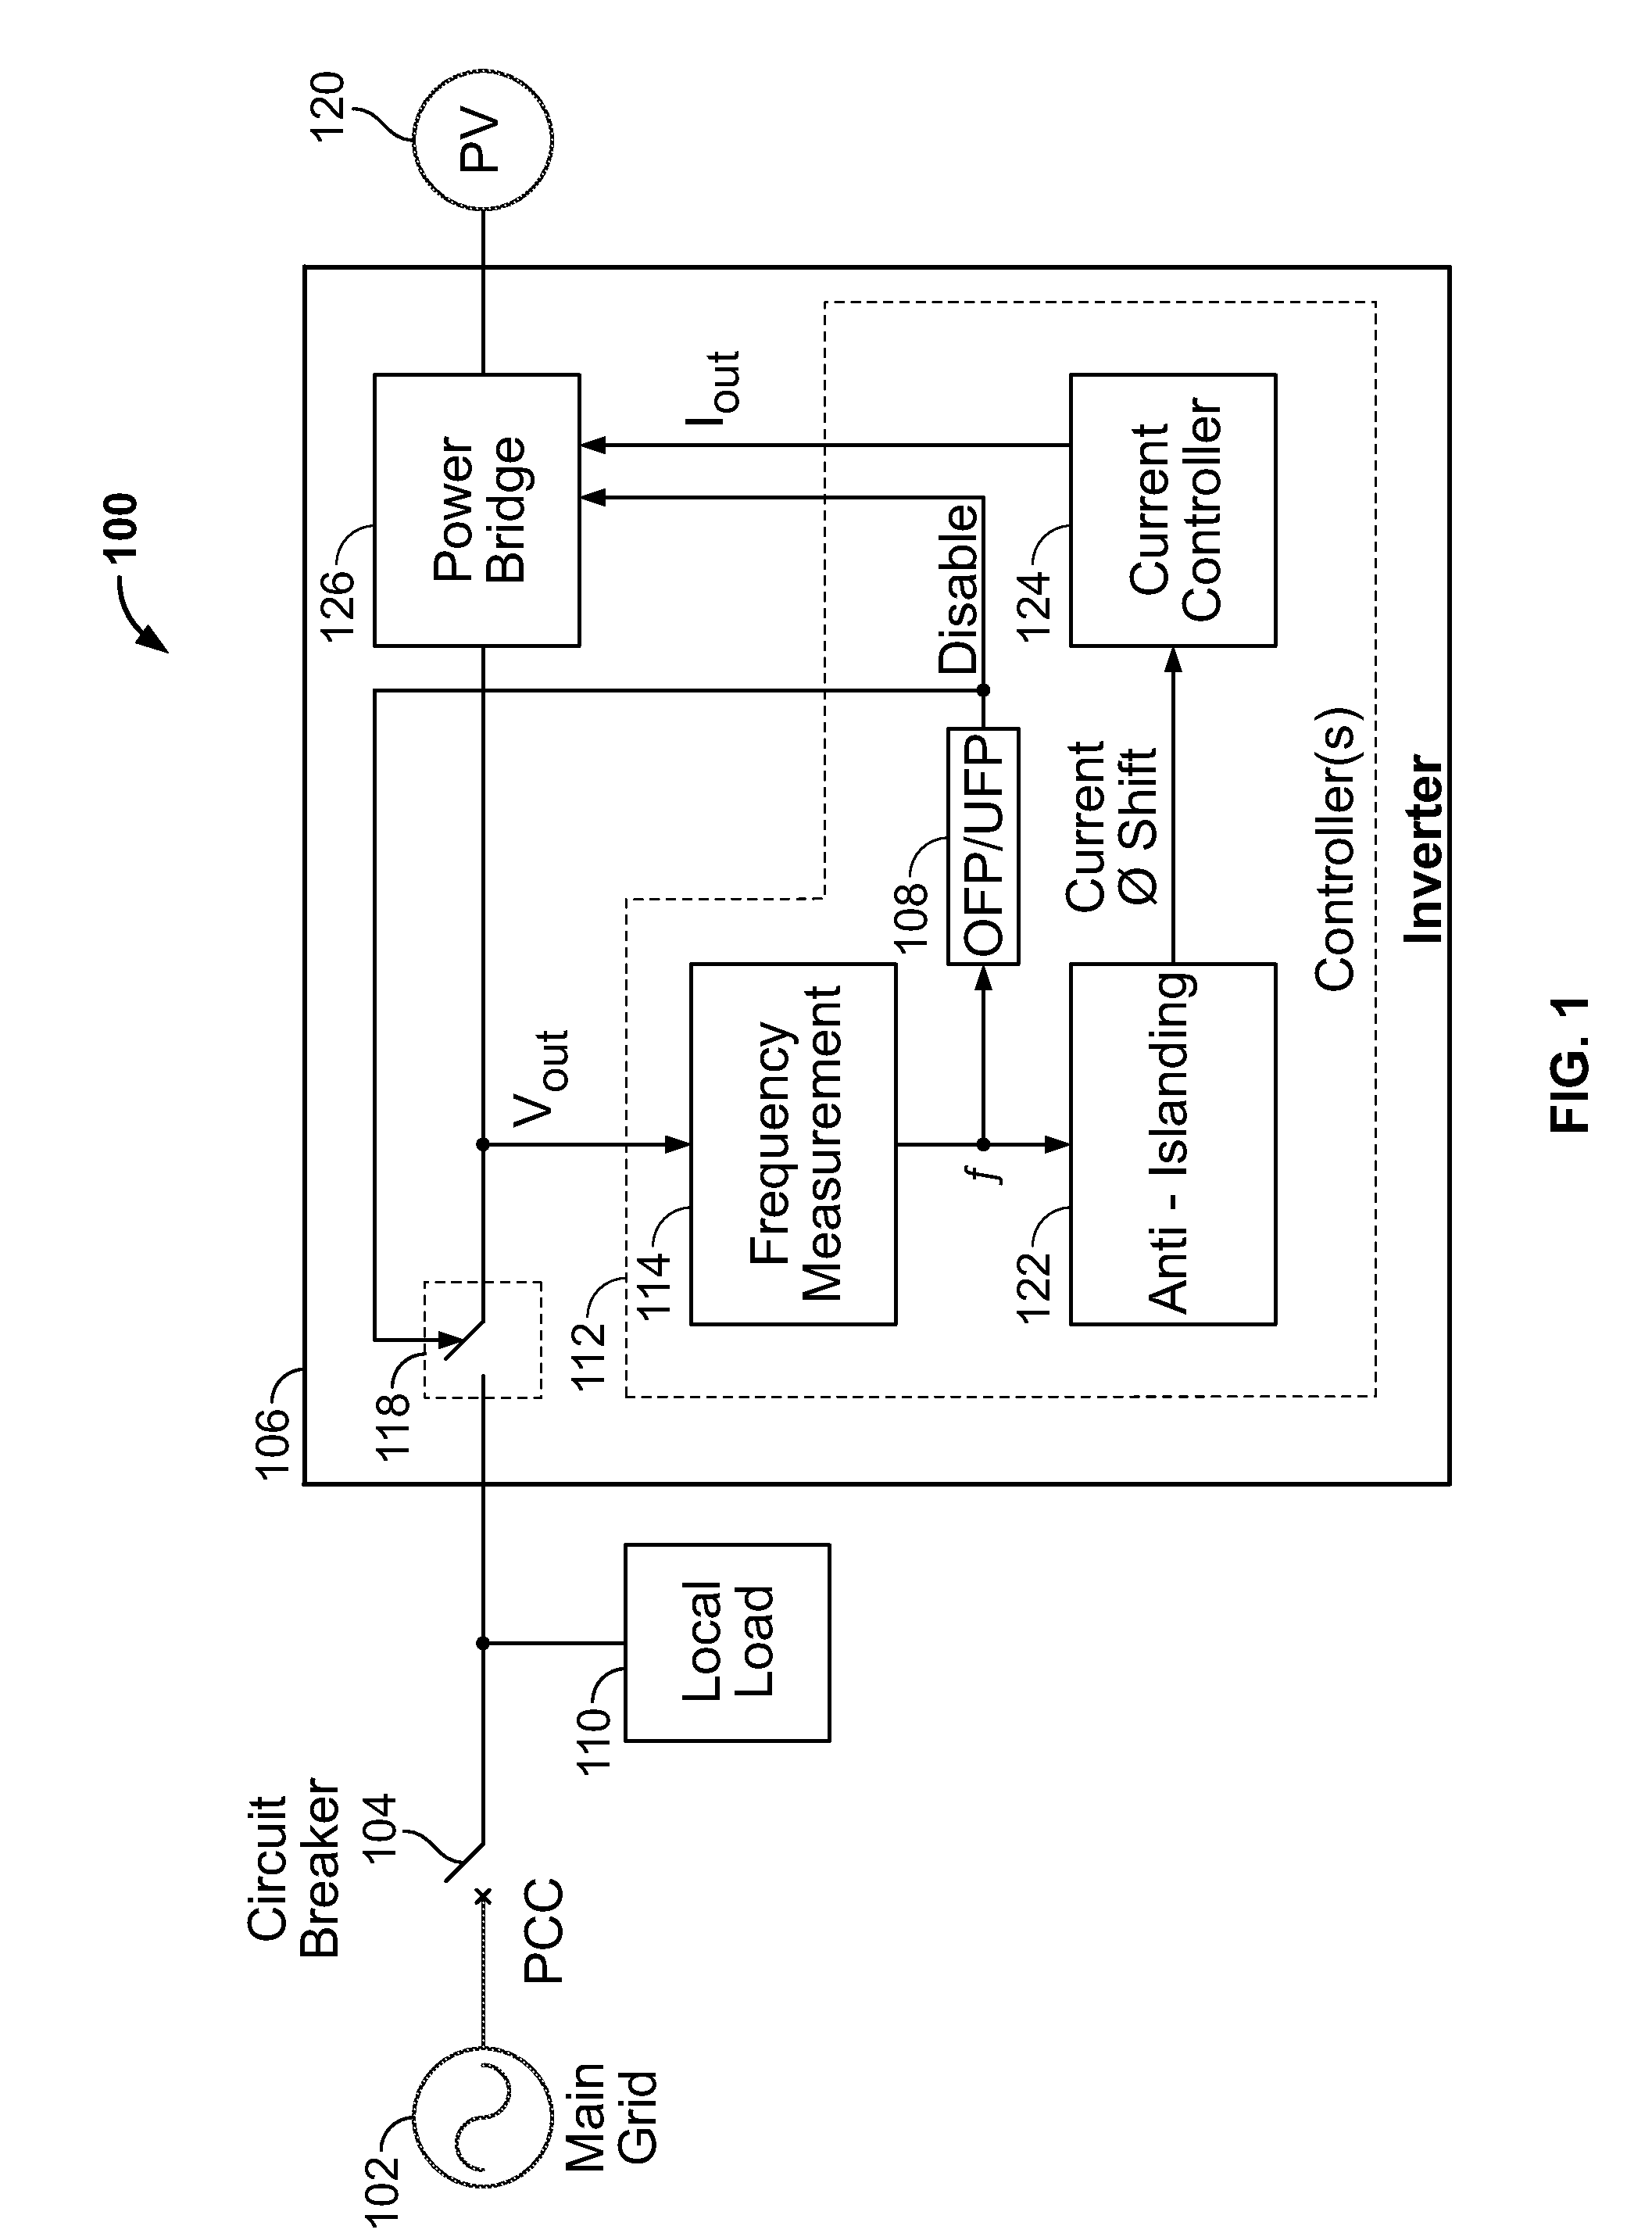 Anti-islanding for grid-tie inverter using covariance estimation and logic decision maker